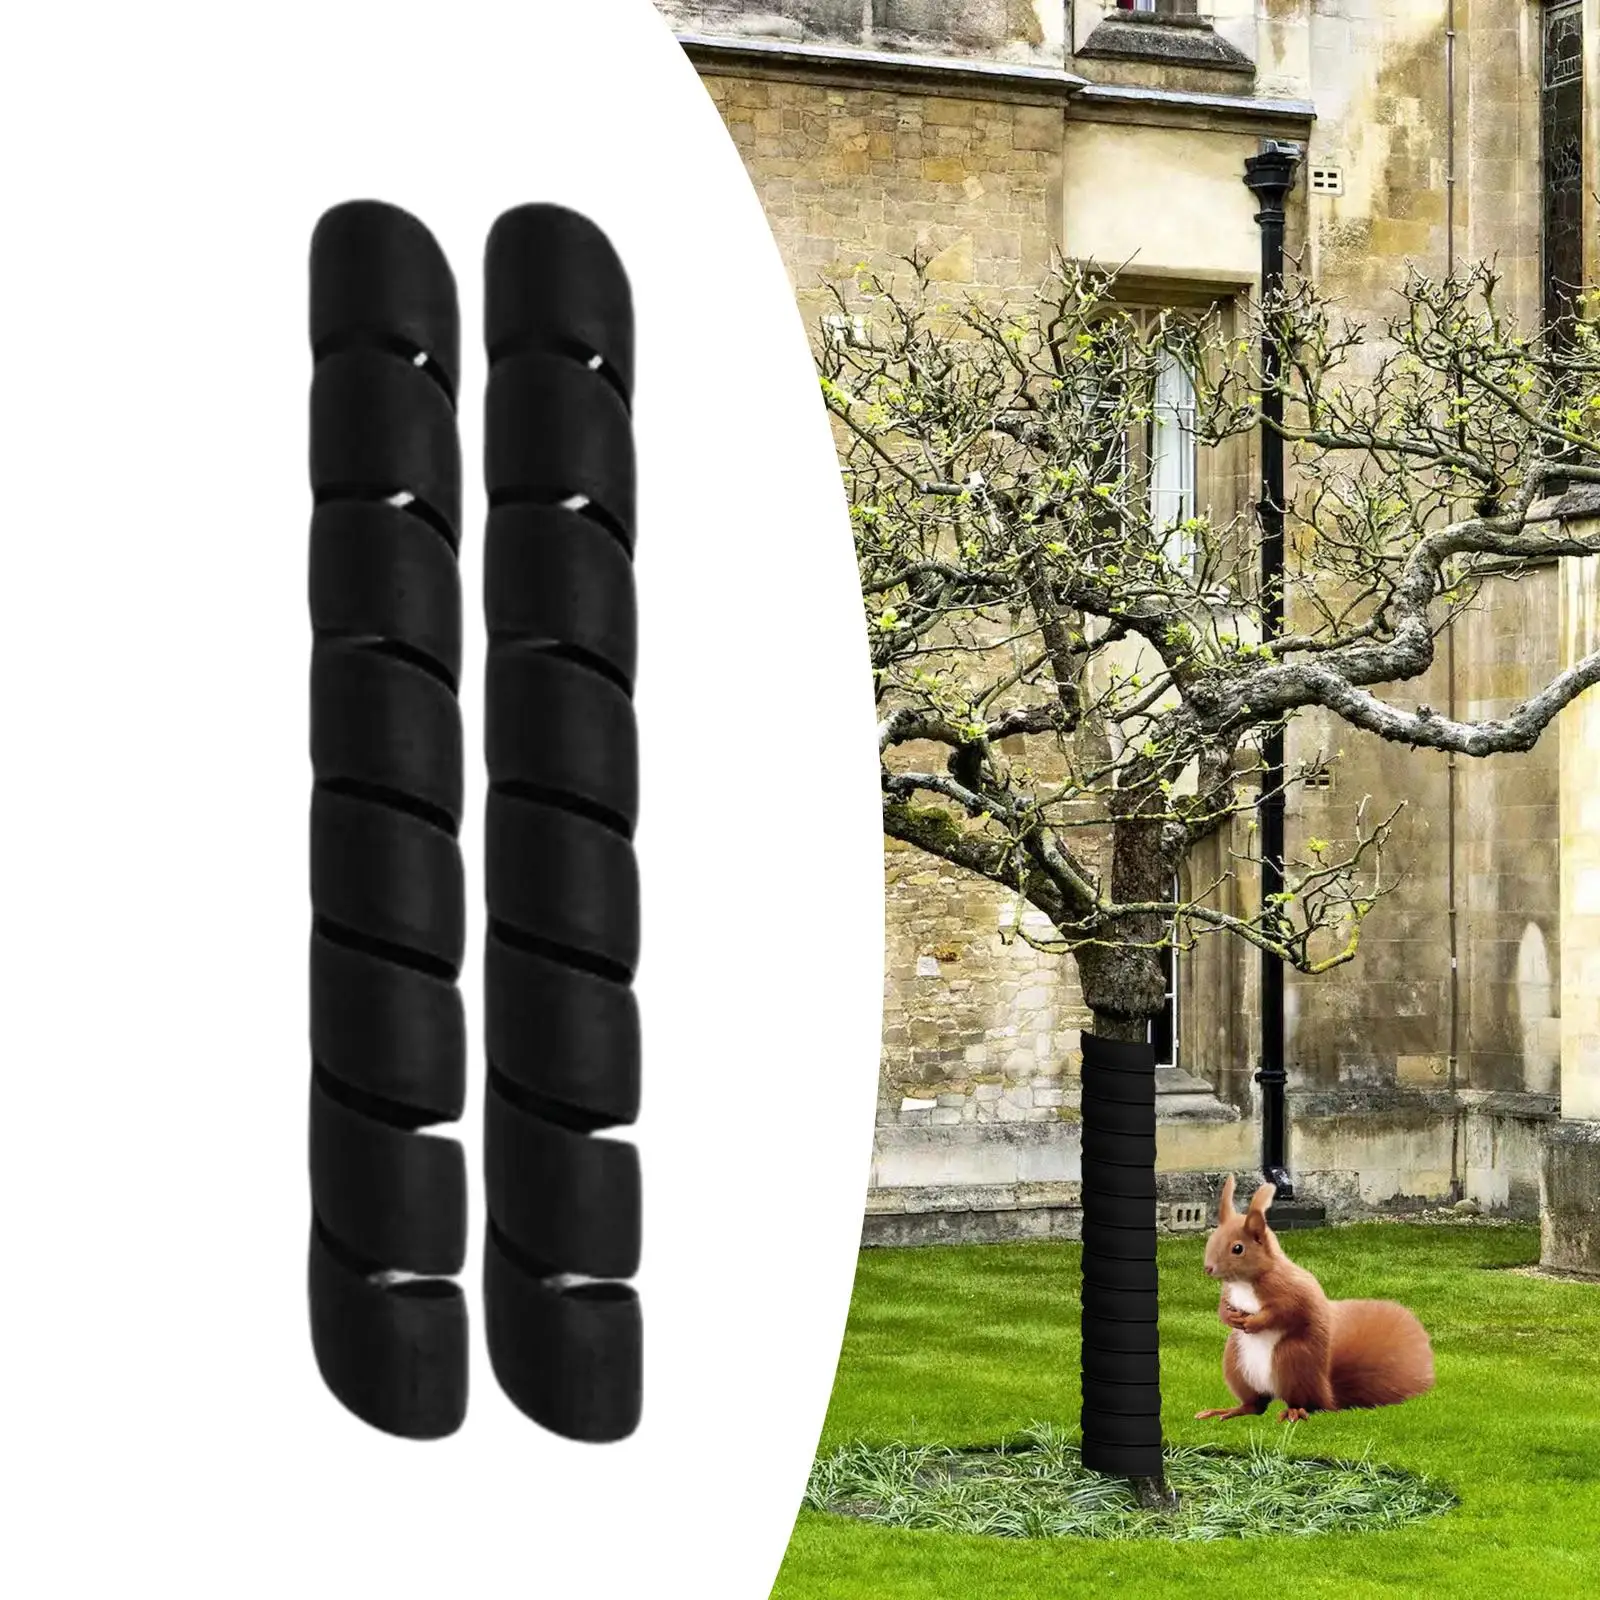 2x Tree Trunk Protectors Portable Weather Resistant Flexible Scratch Resistant Sapling Protector Easy to Use Spiral Tree Guards